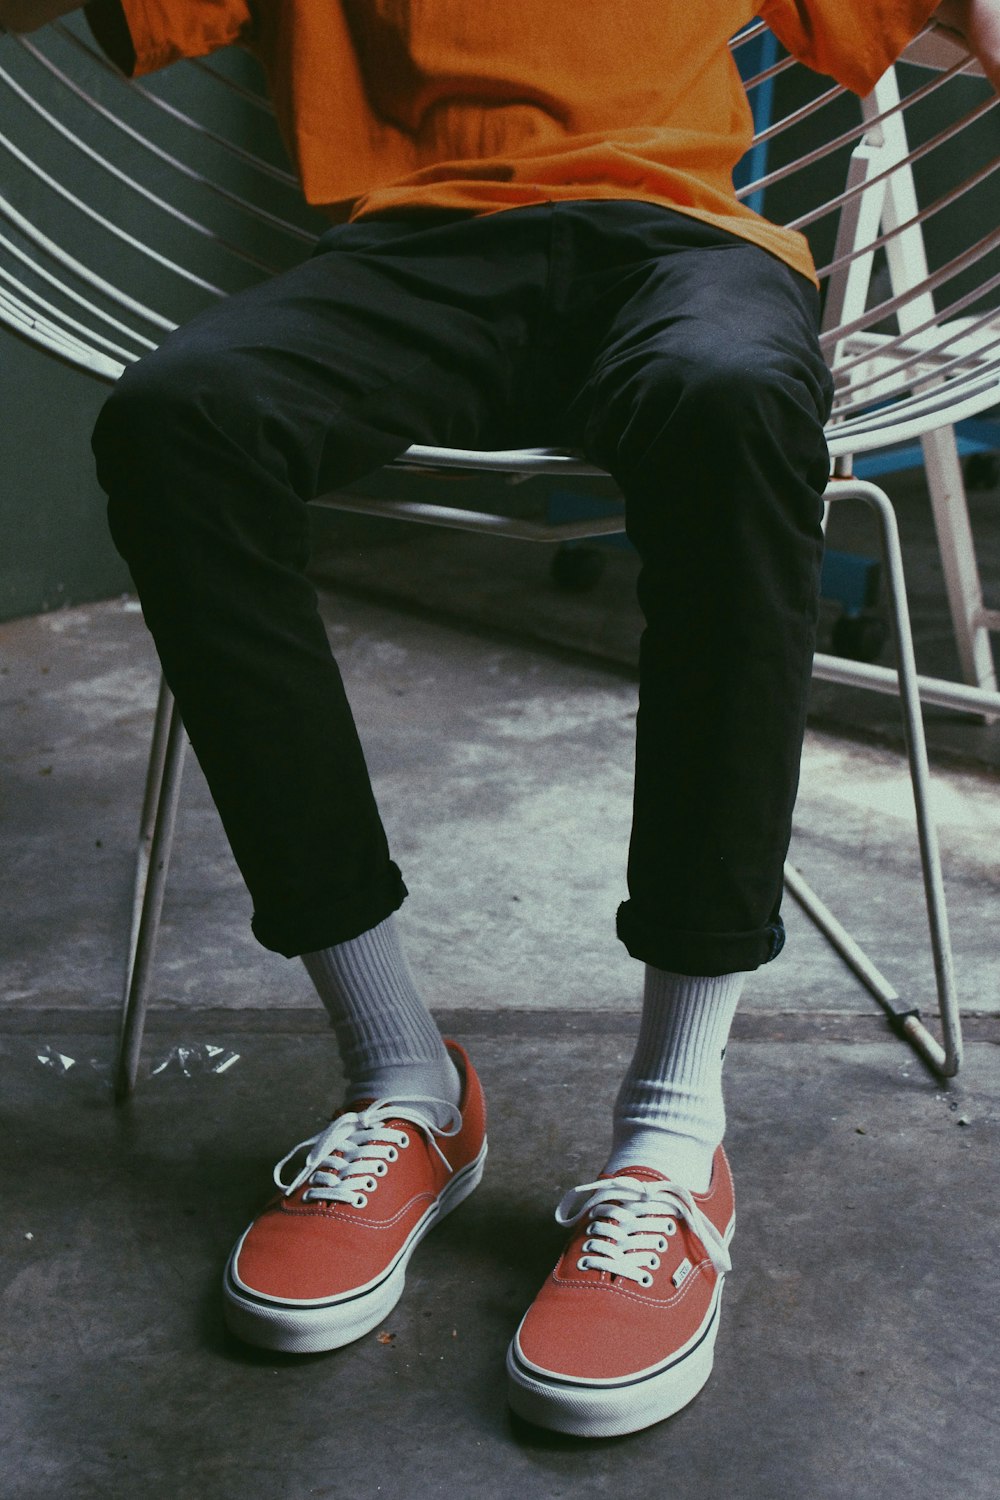 person in black pants and red and white sneakers